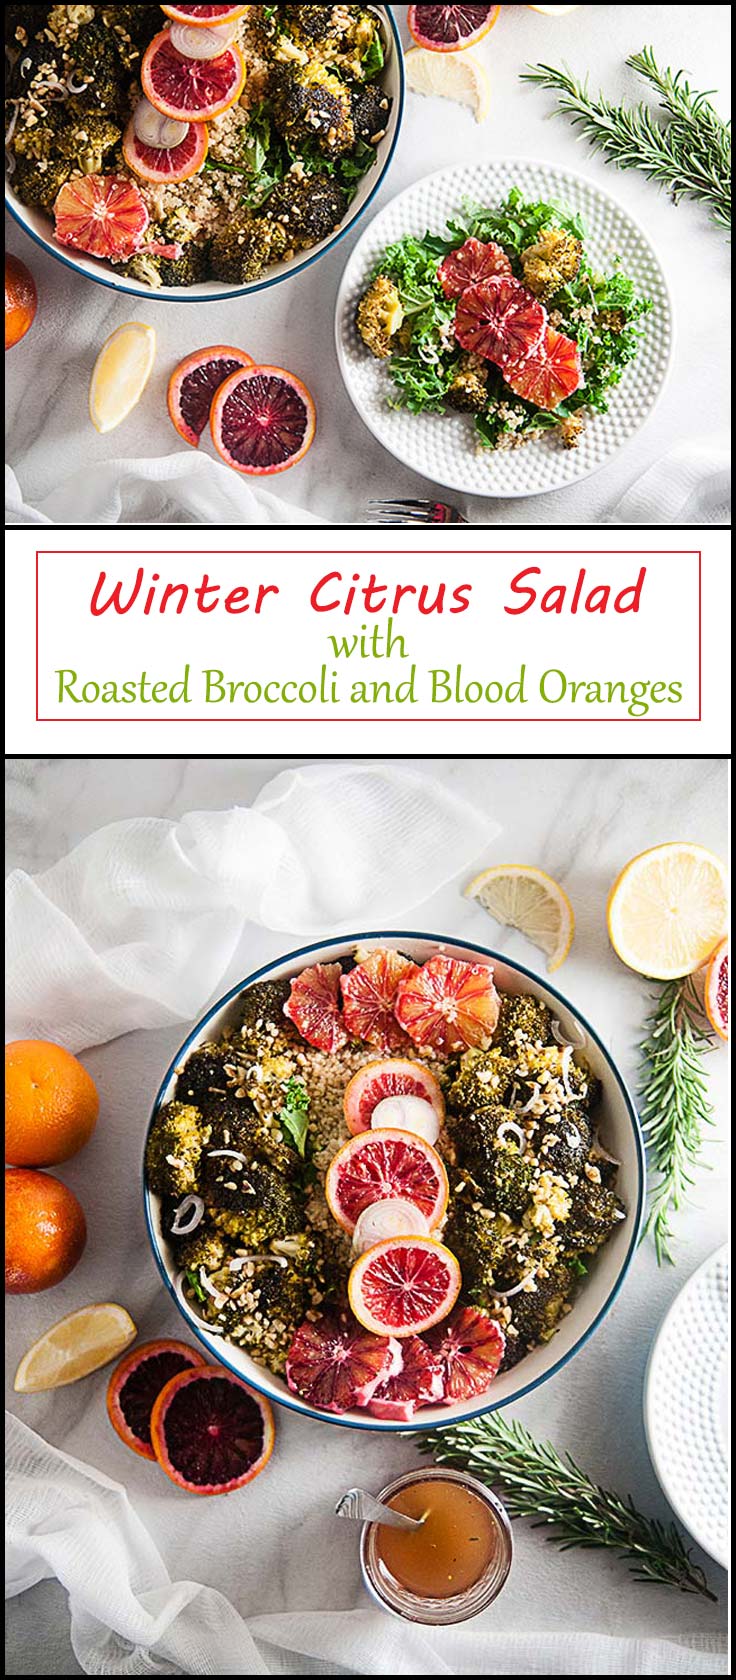 Winter Citrus Salad with Roasted Broccoli, Blood Oranges, and Quinoa from www.seasonedsprinkles.com